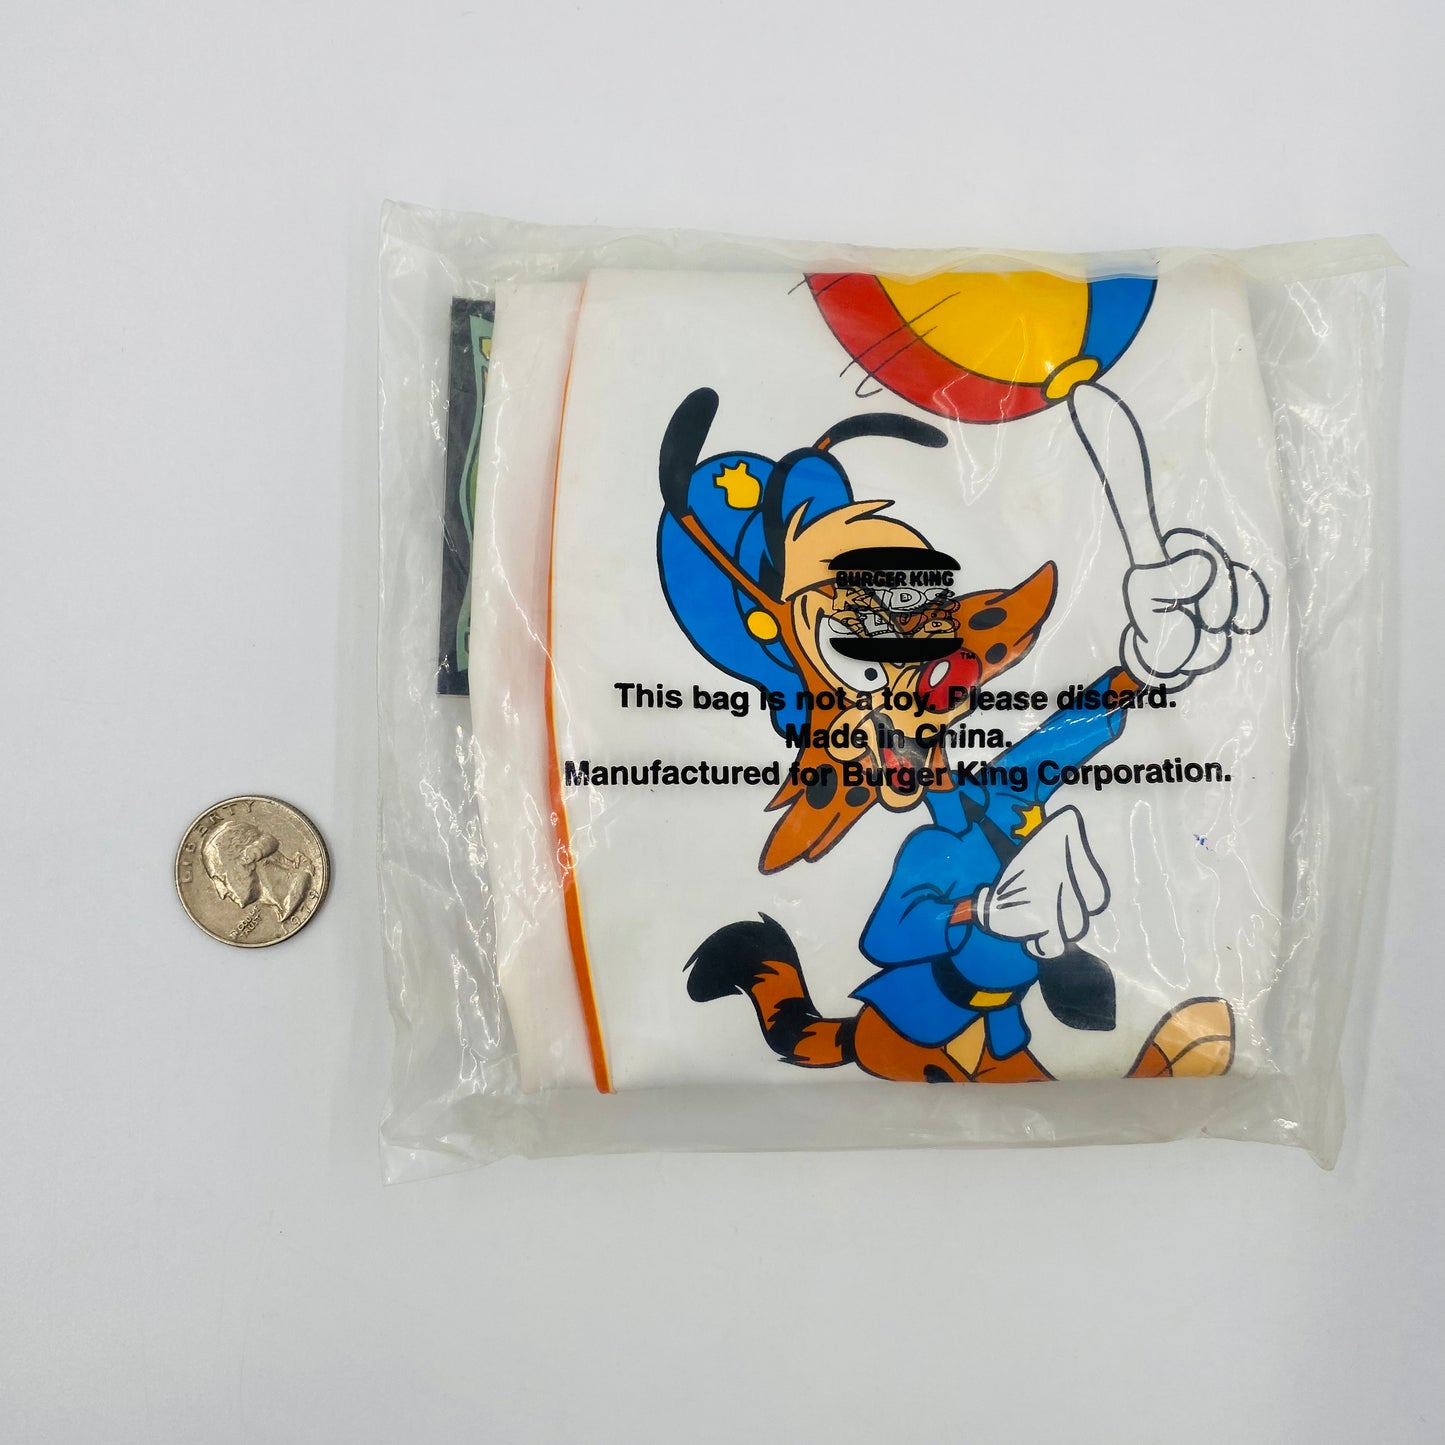 Disney Afternoon Bonkers D Bobcat blow up beach ball Burger King Kids' Meal toy (1994) bagged